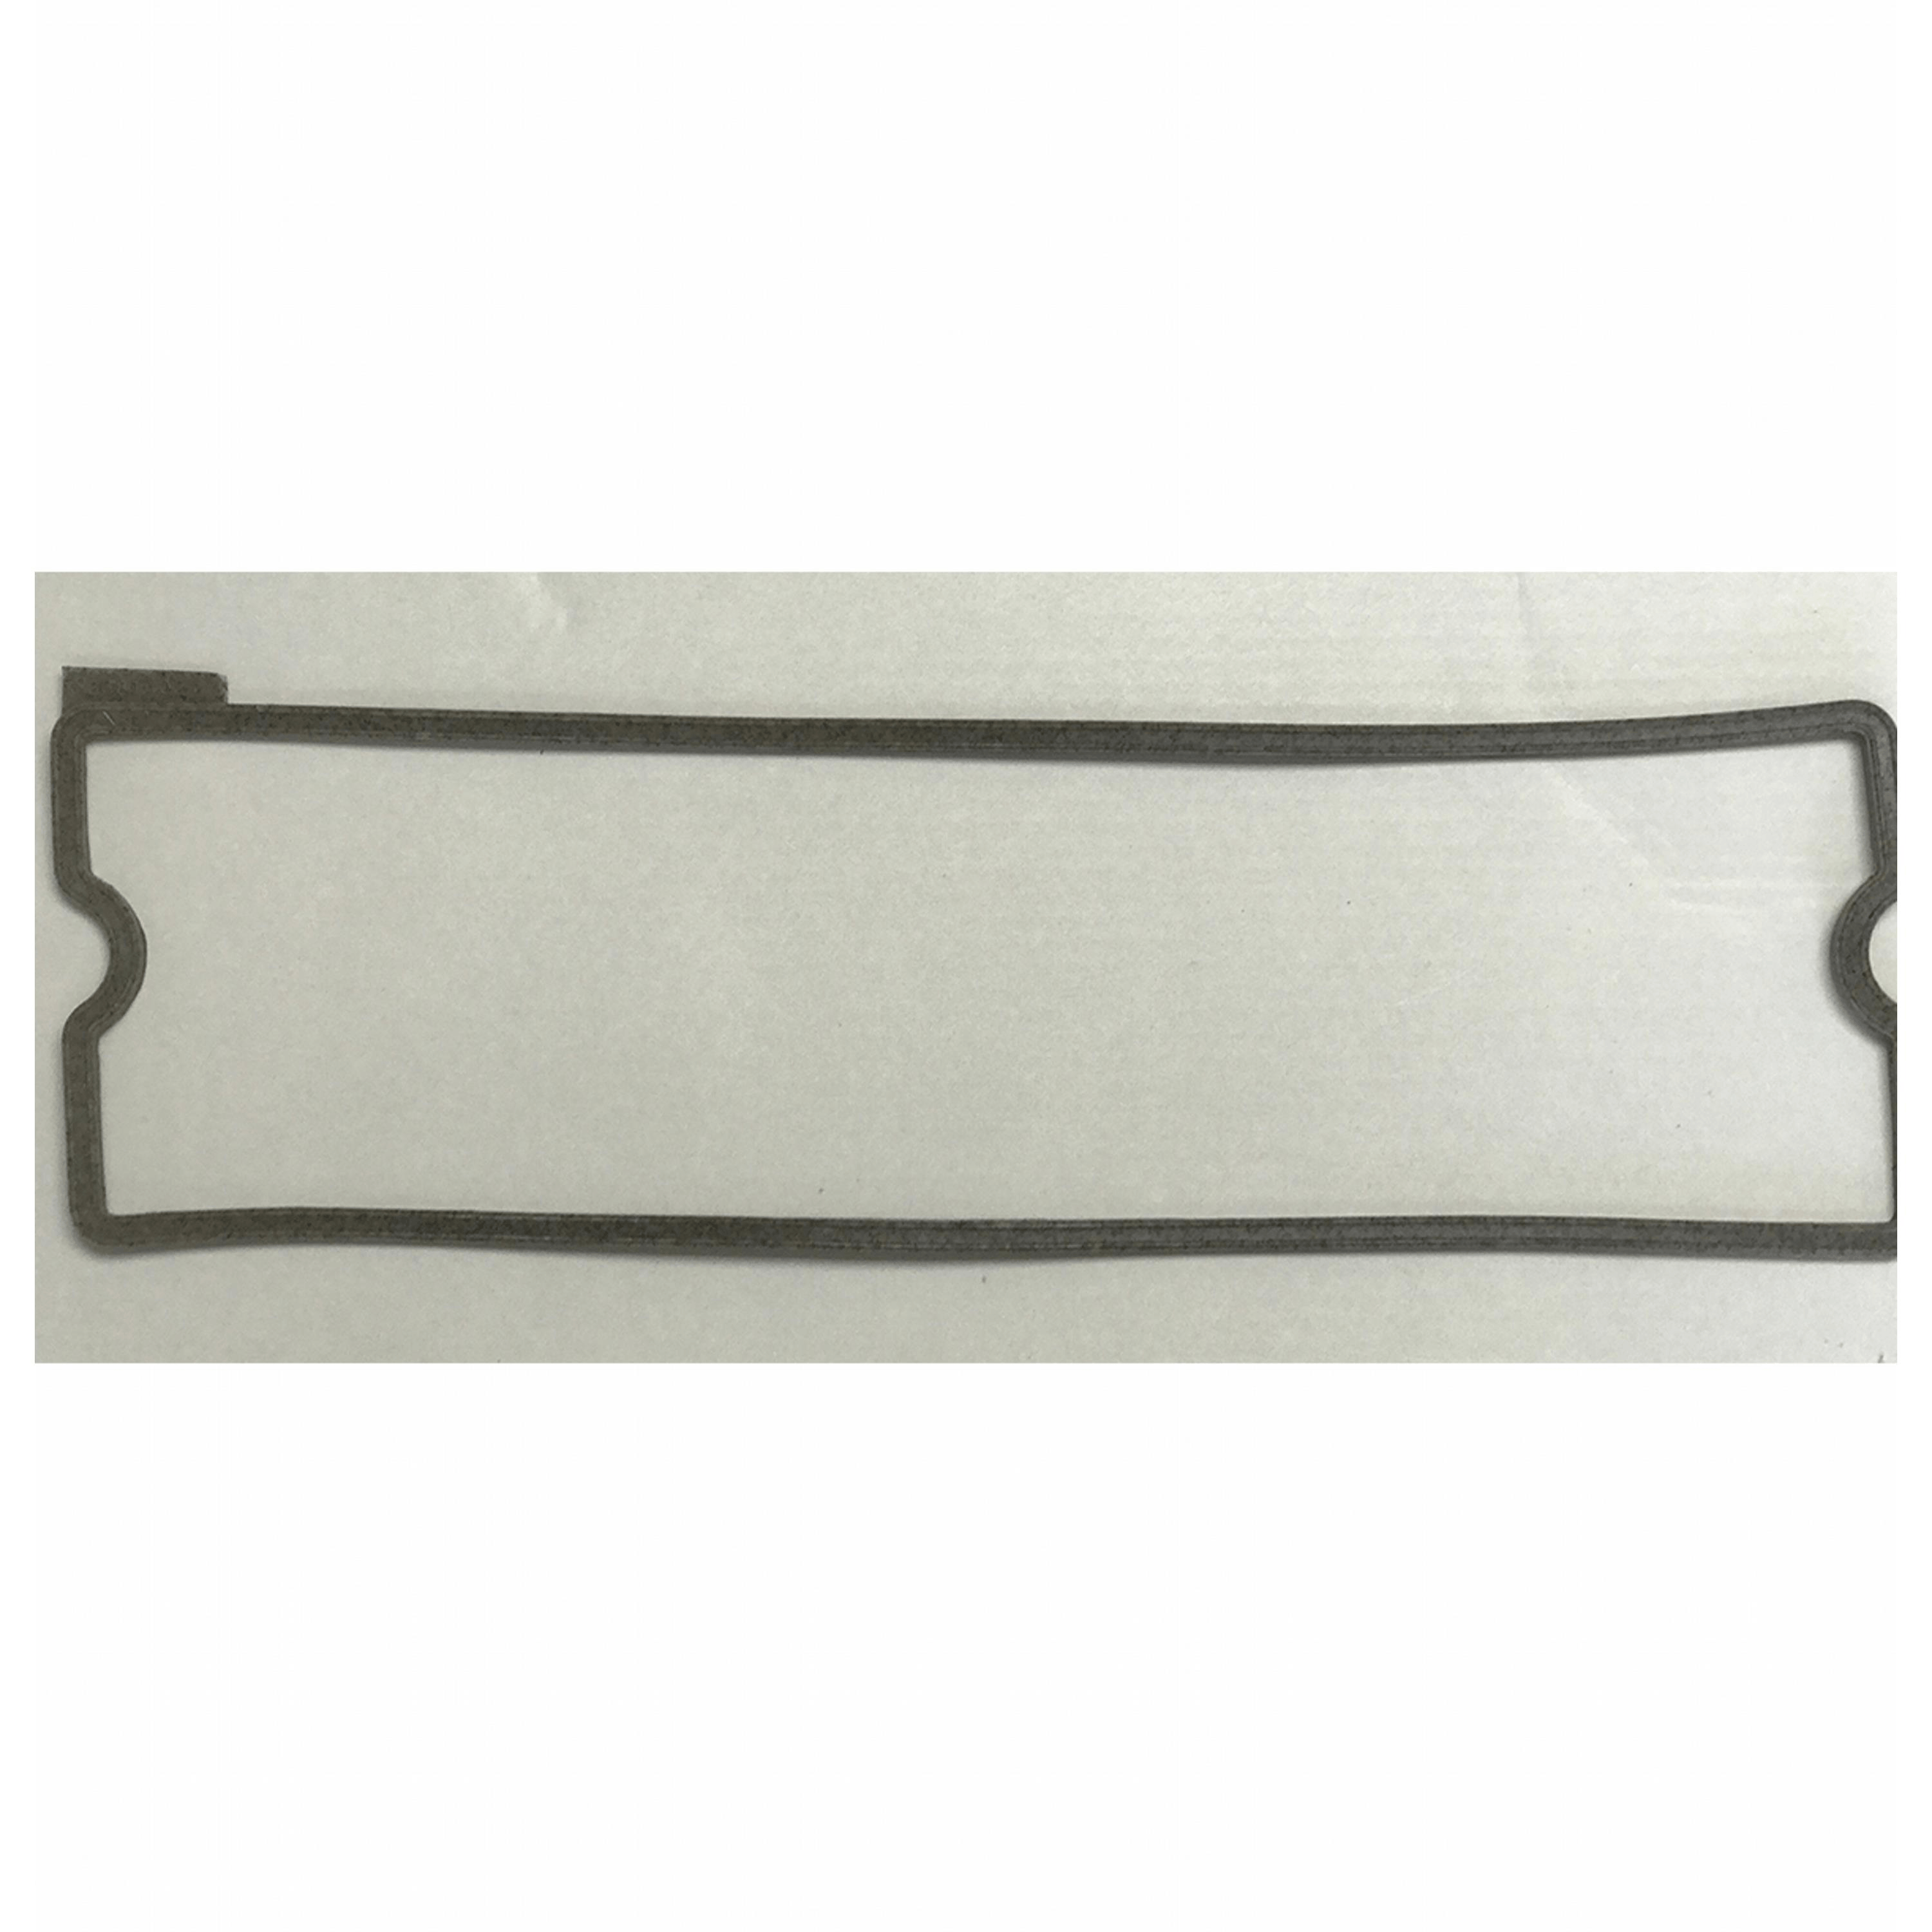 Valve Cover Gasket – HCB126-6671